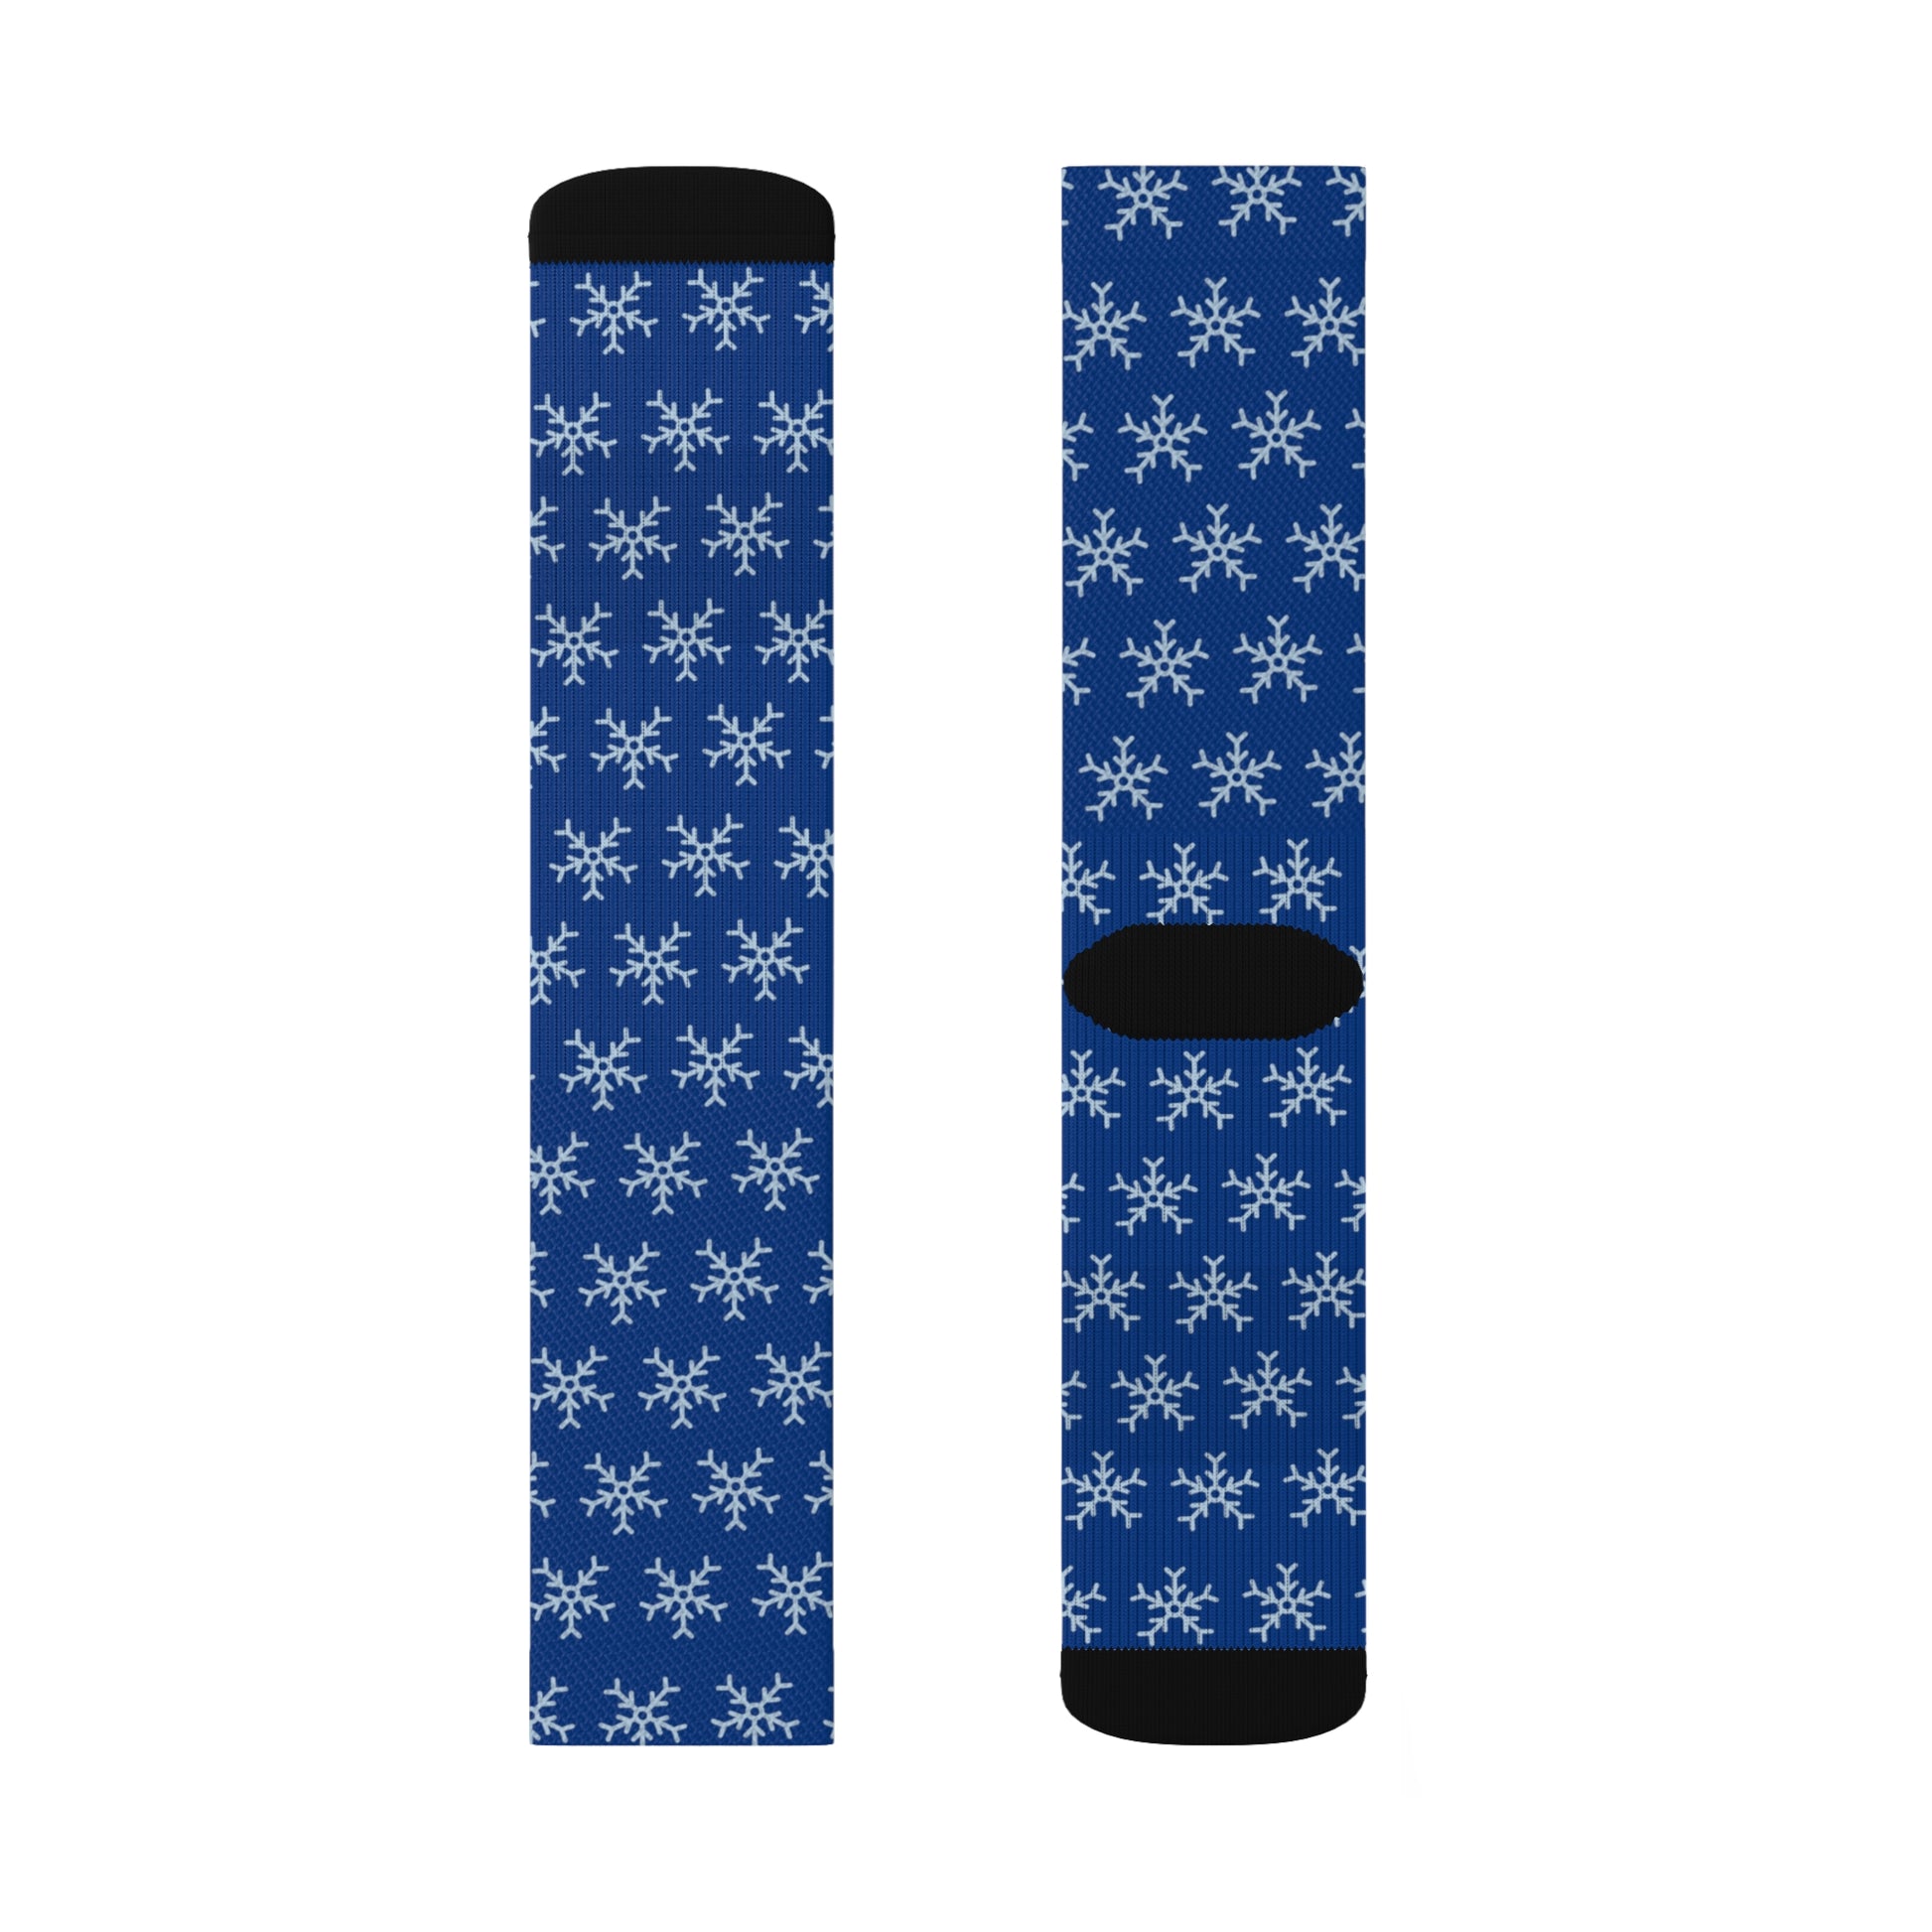 A pair of Printify blue tube socks with snowflakes.